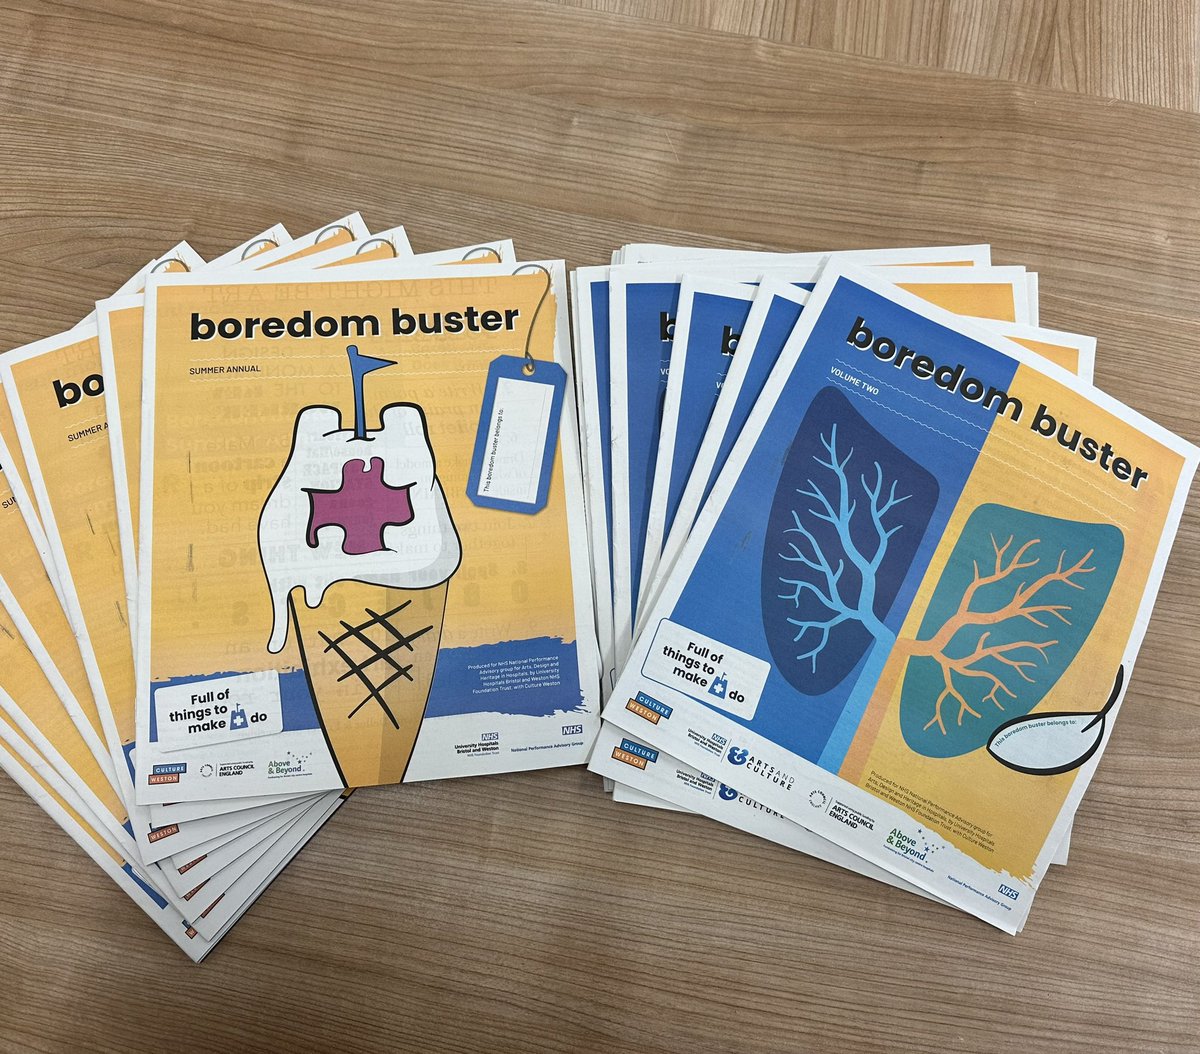 Fresh Arts have delivered 4300 Boredom Buster newspapers to 45 locations across @NorthBristolNHS Have you found a copy? We hope both patients and staff enjoy reading them & doing the activities together. Massive thank you to all the artists & contributors of the papers!